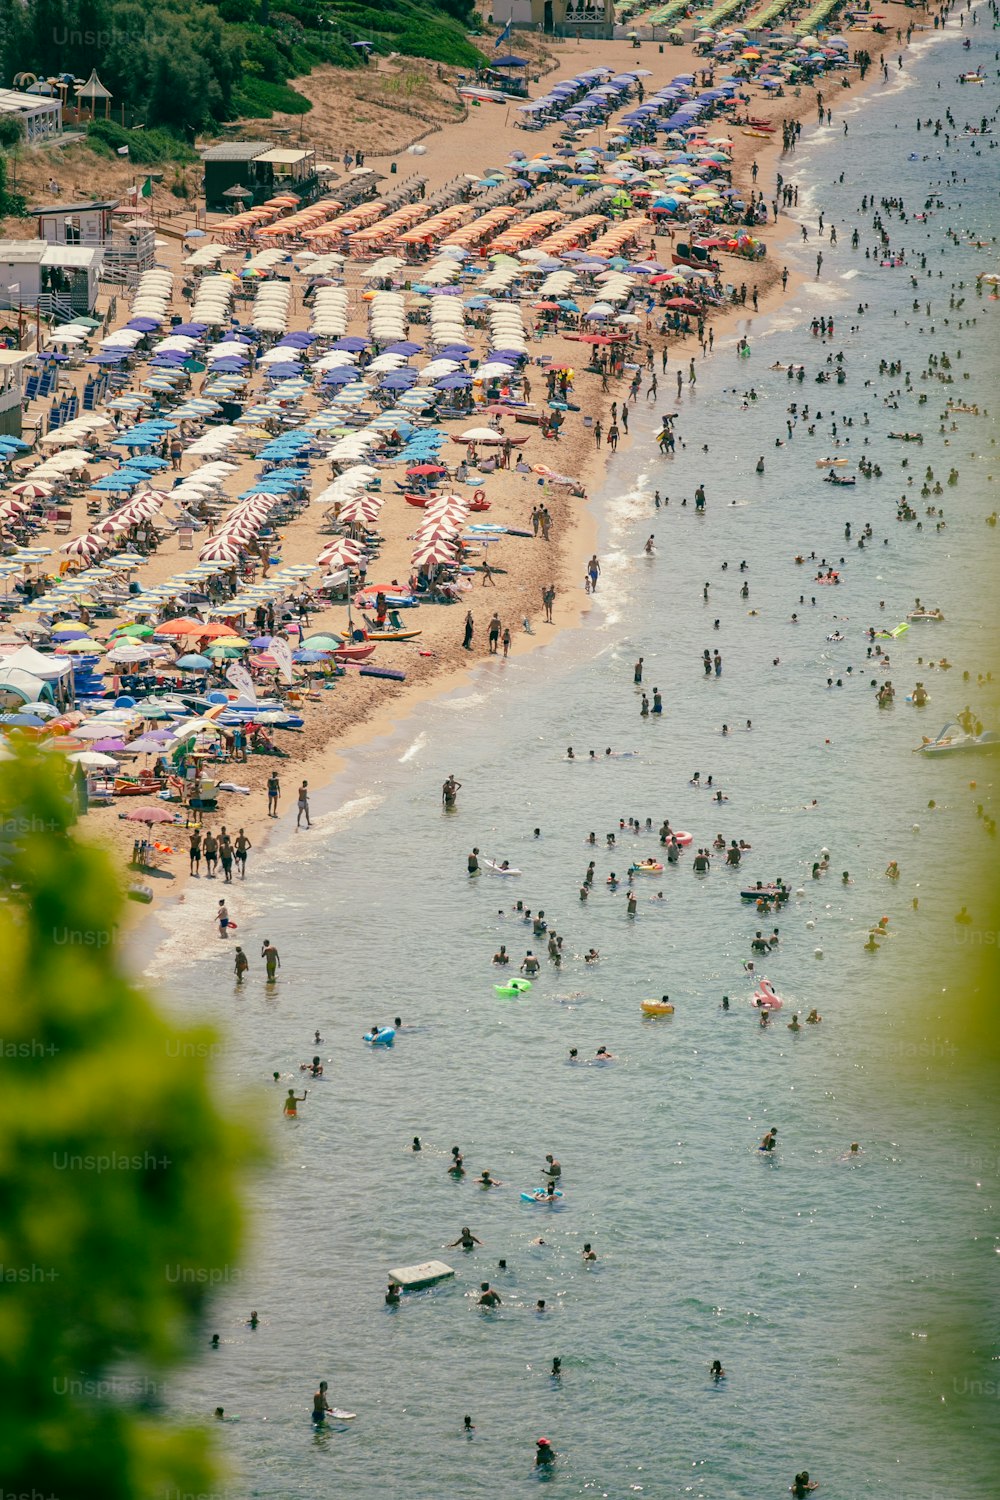 a crowded beach filled with lots of people and umbrellas